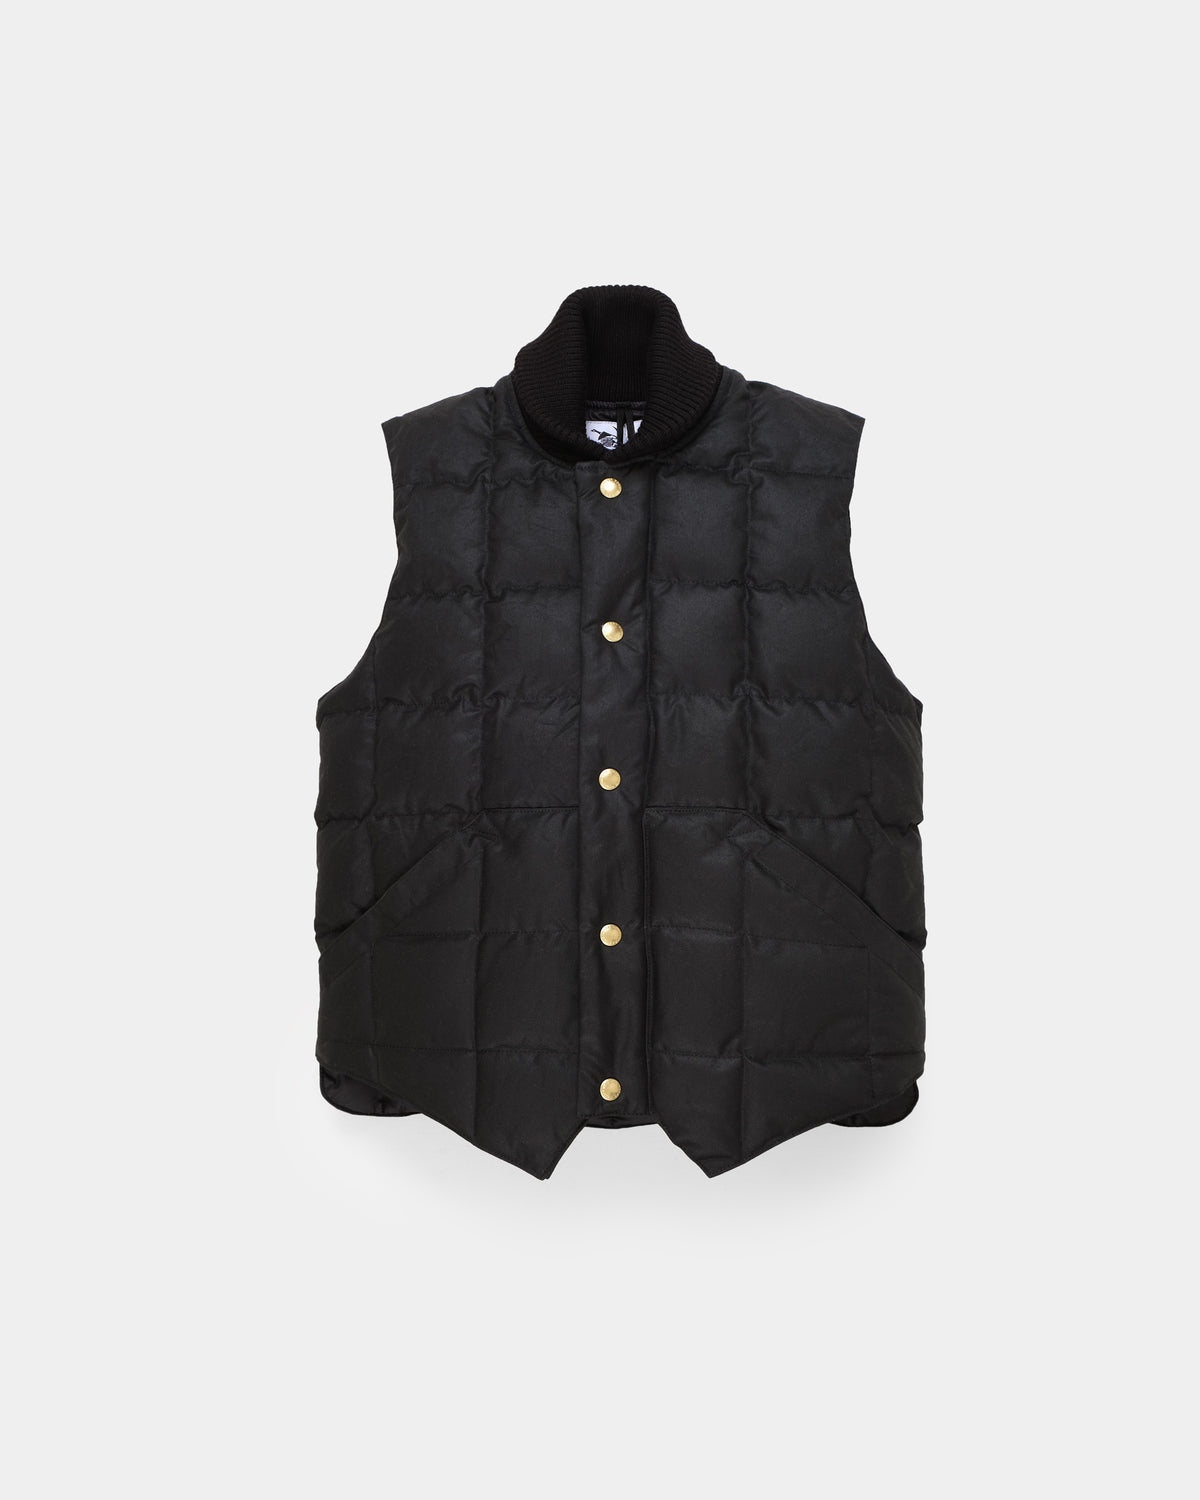 NxNW Box Quilt Vest – Waxed Cotton – Black